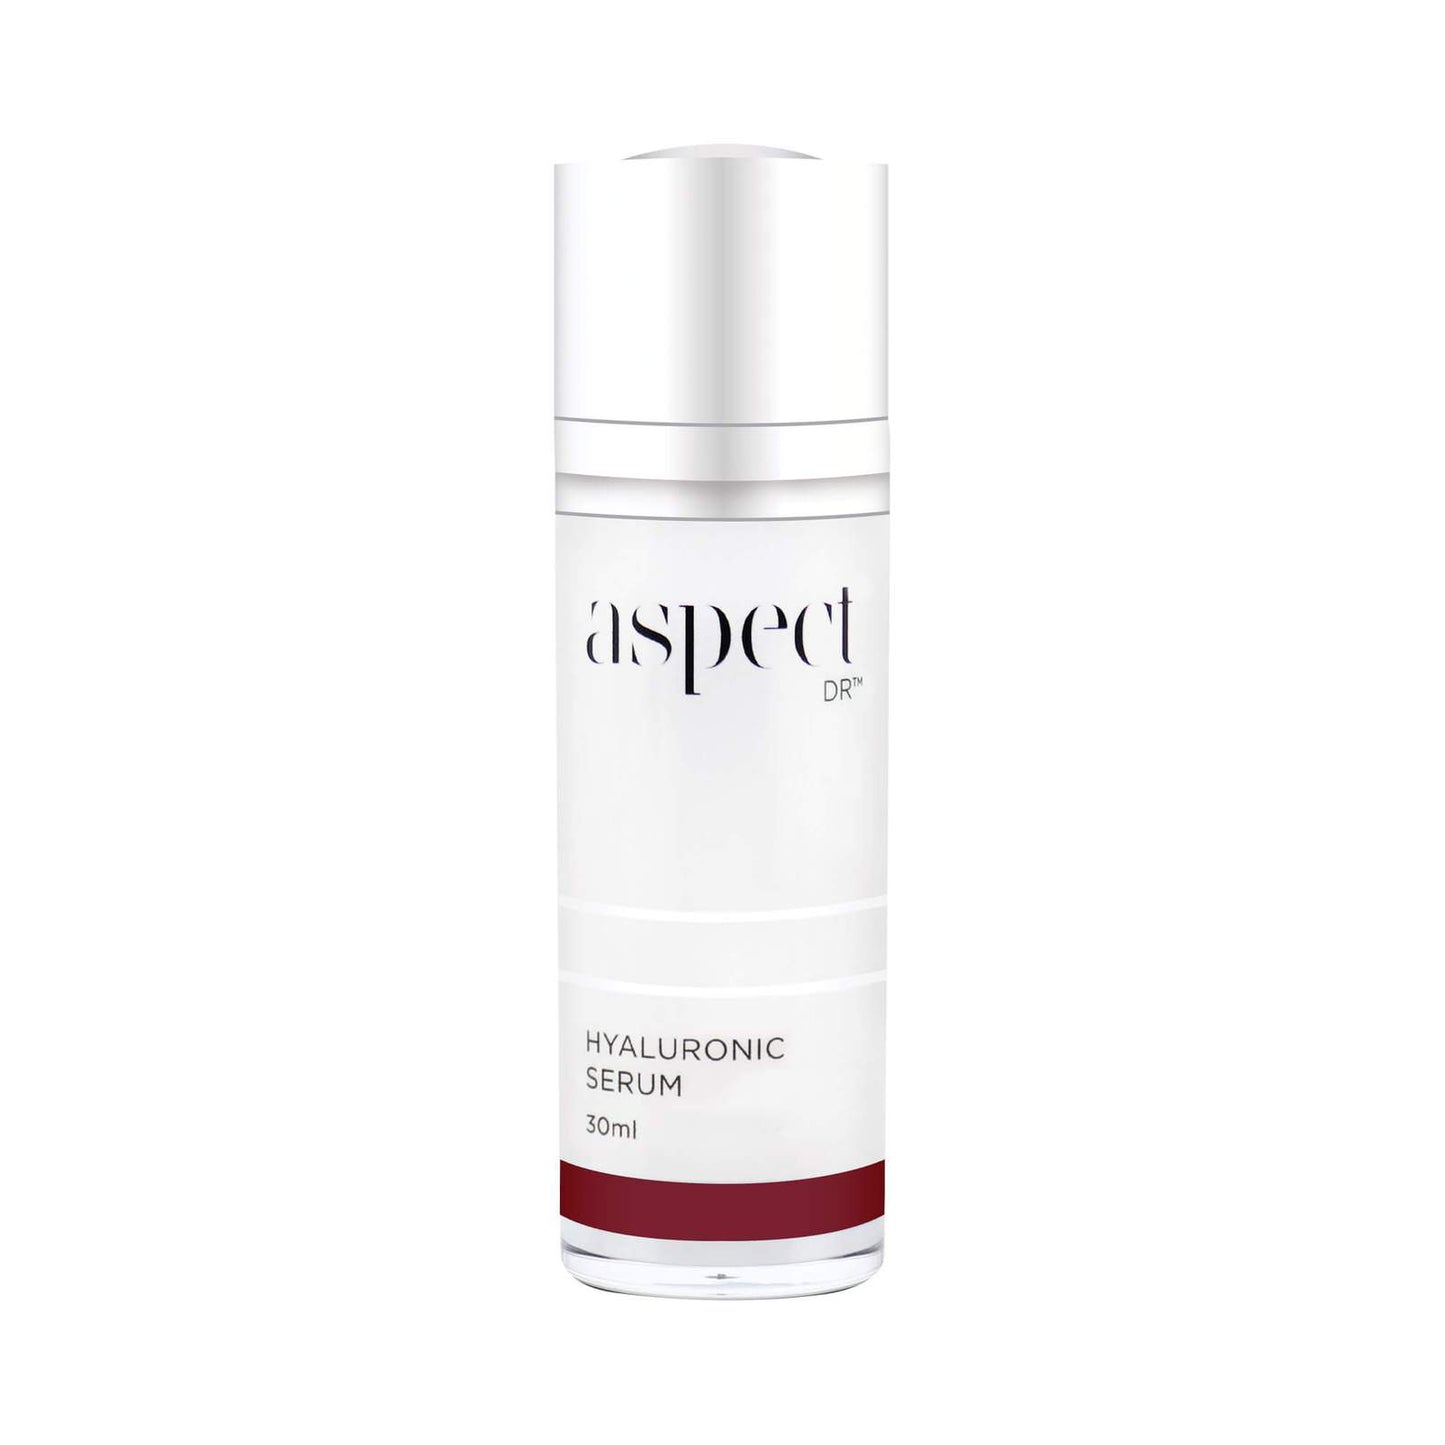 Aspecr Dr Hyaluronic serum - A hydration boosting serum formulated with two forms of Hyaluronic Acid, known for their rejuvenating properties, and antioxidants to replenish moisture and protect against external free radical damage. Infinity Skin Clinic